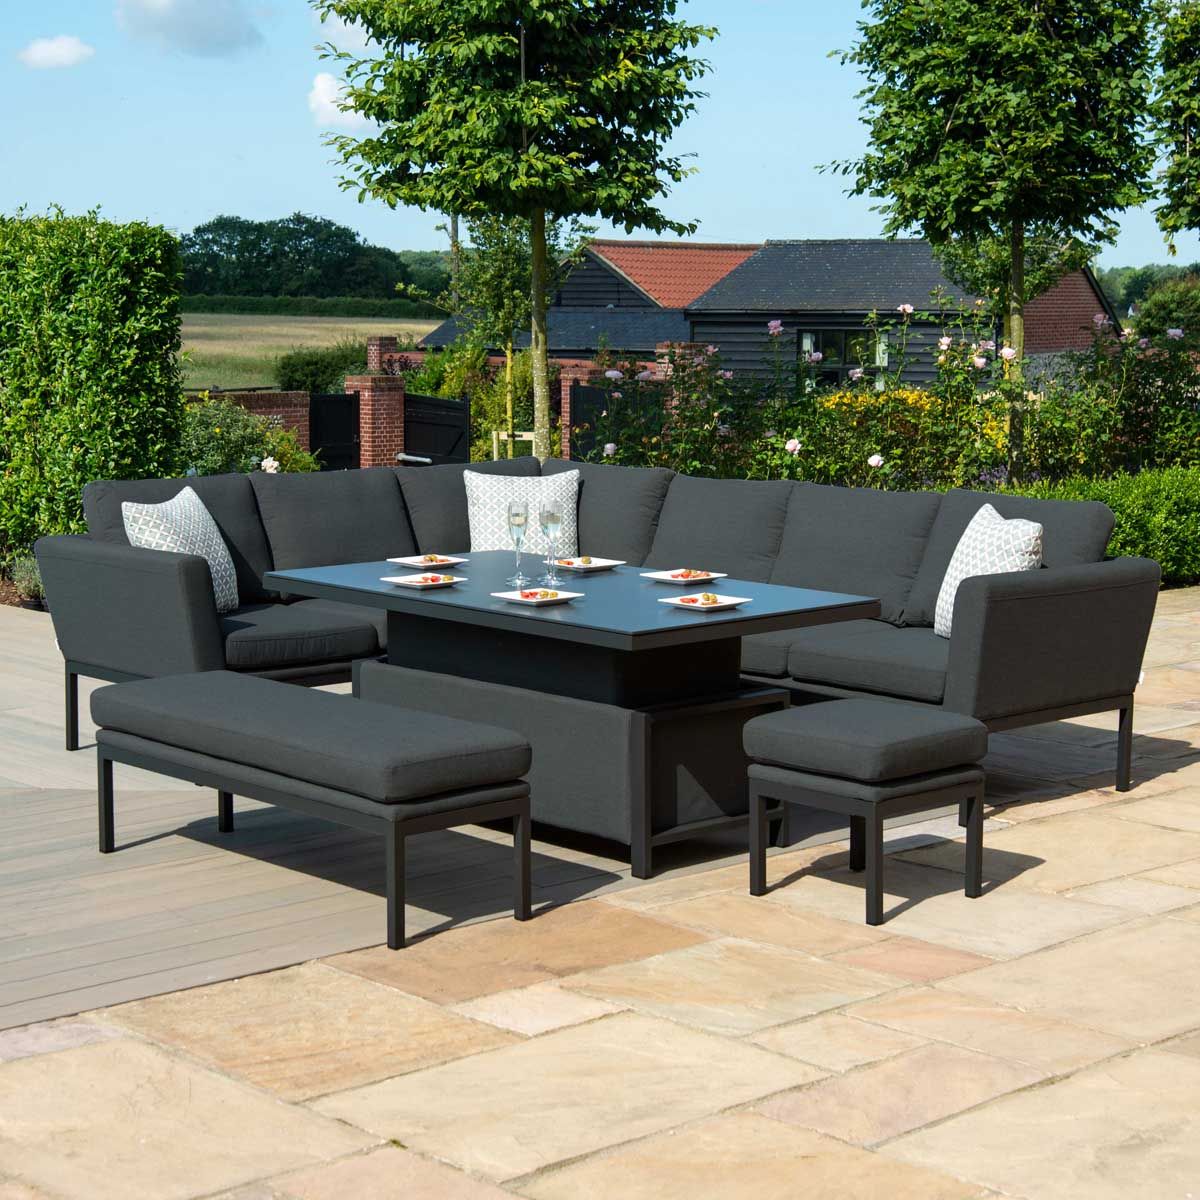 Maze Rattan Pulse Rectangular Corner Dining Set With Rising Table In Large Rectangular Patio Dining Sets (View 11 of 15)